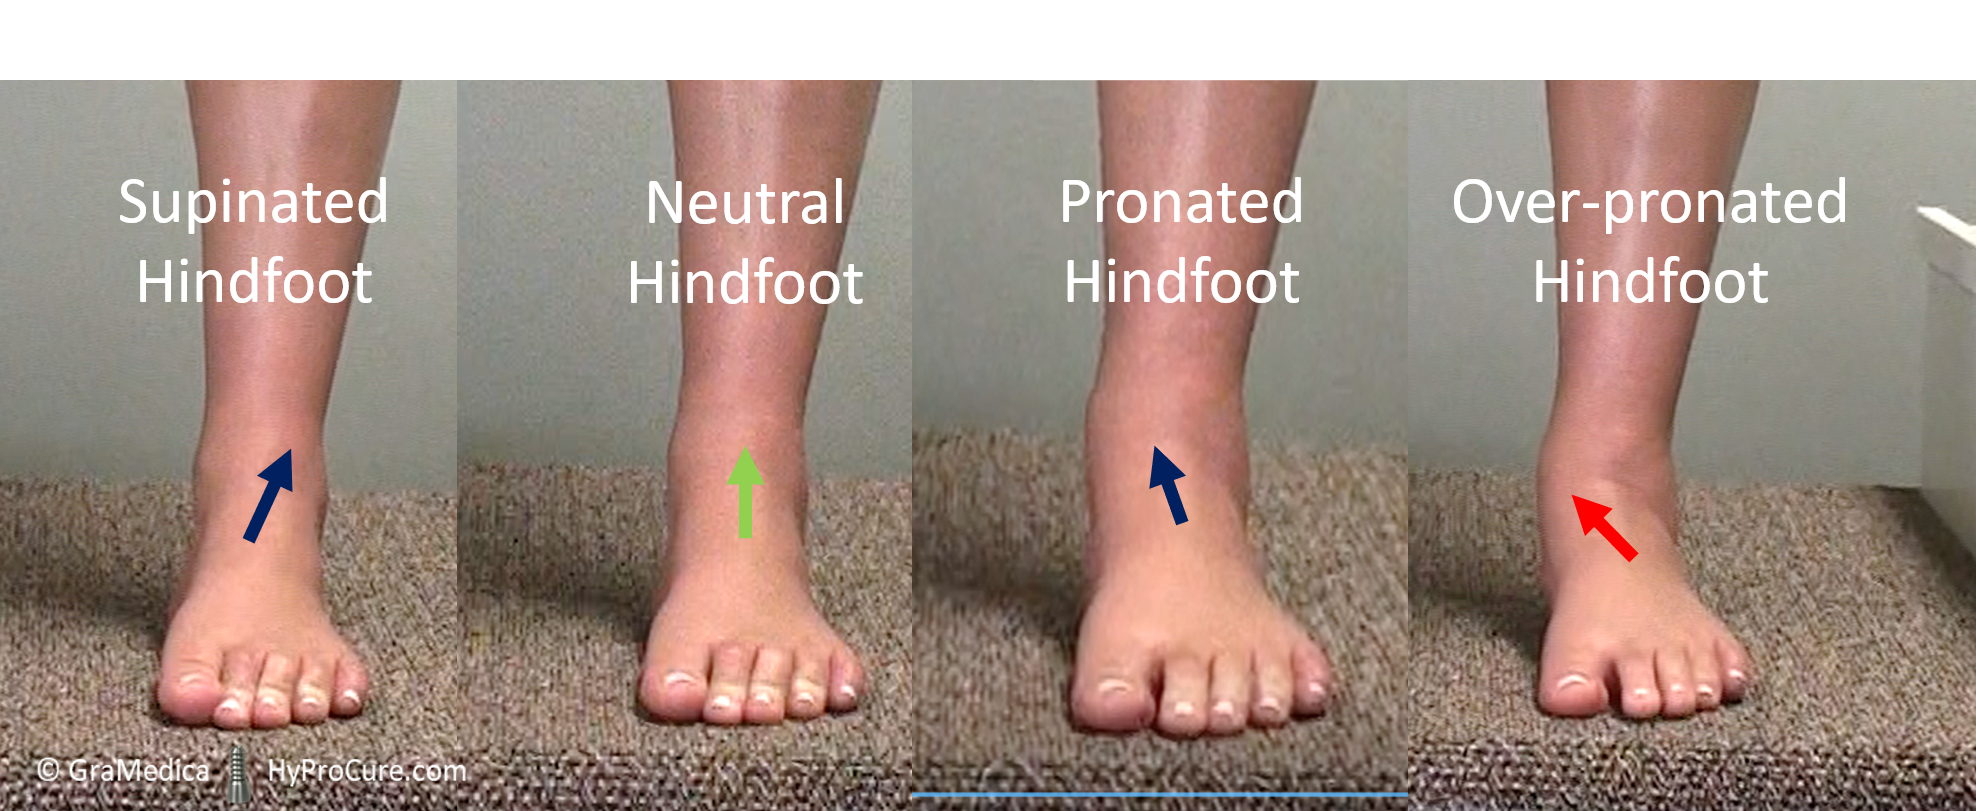 Supinated hindfoot neutral hindfoot pronated hindfoot over-pronated hindfoot